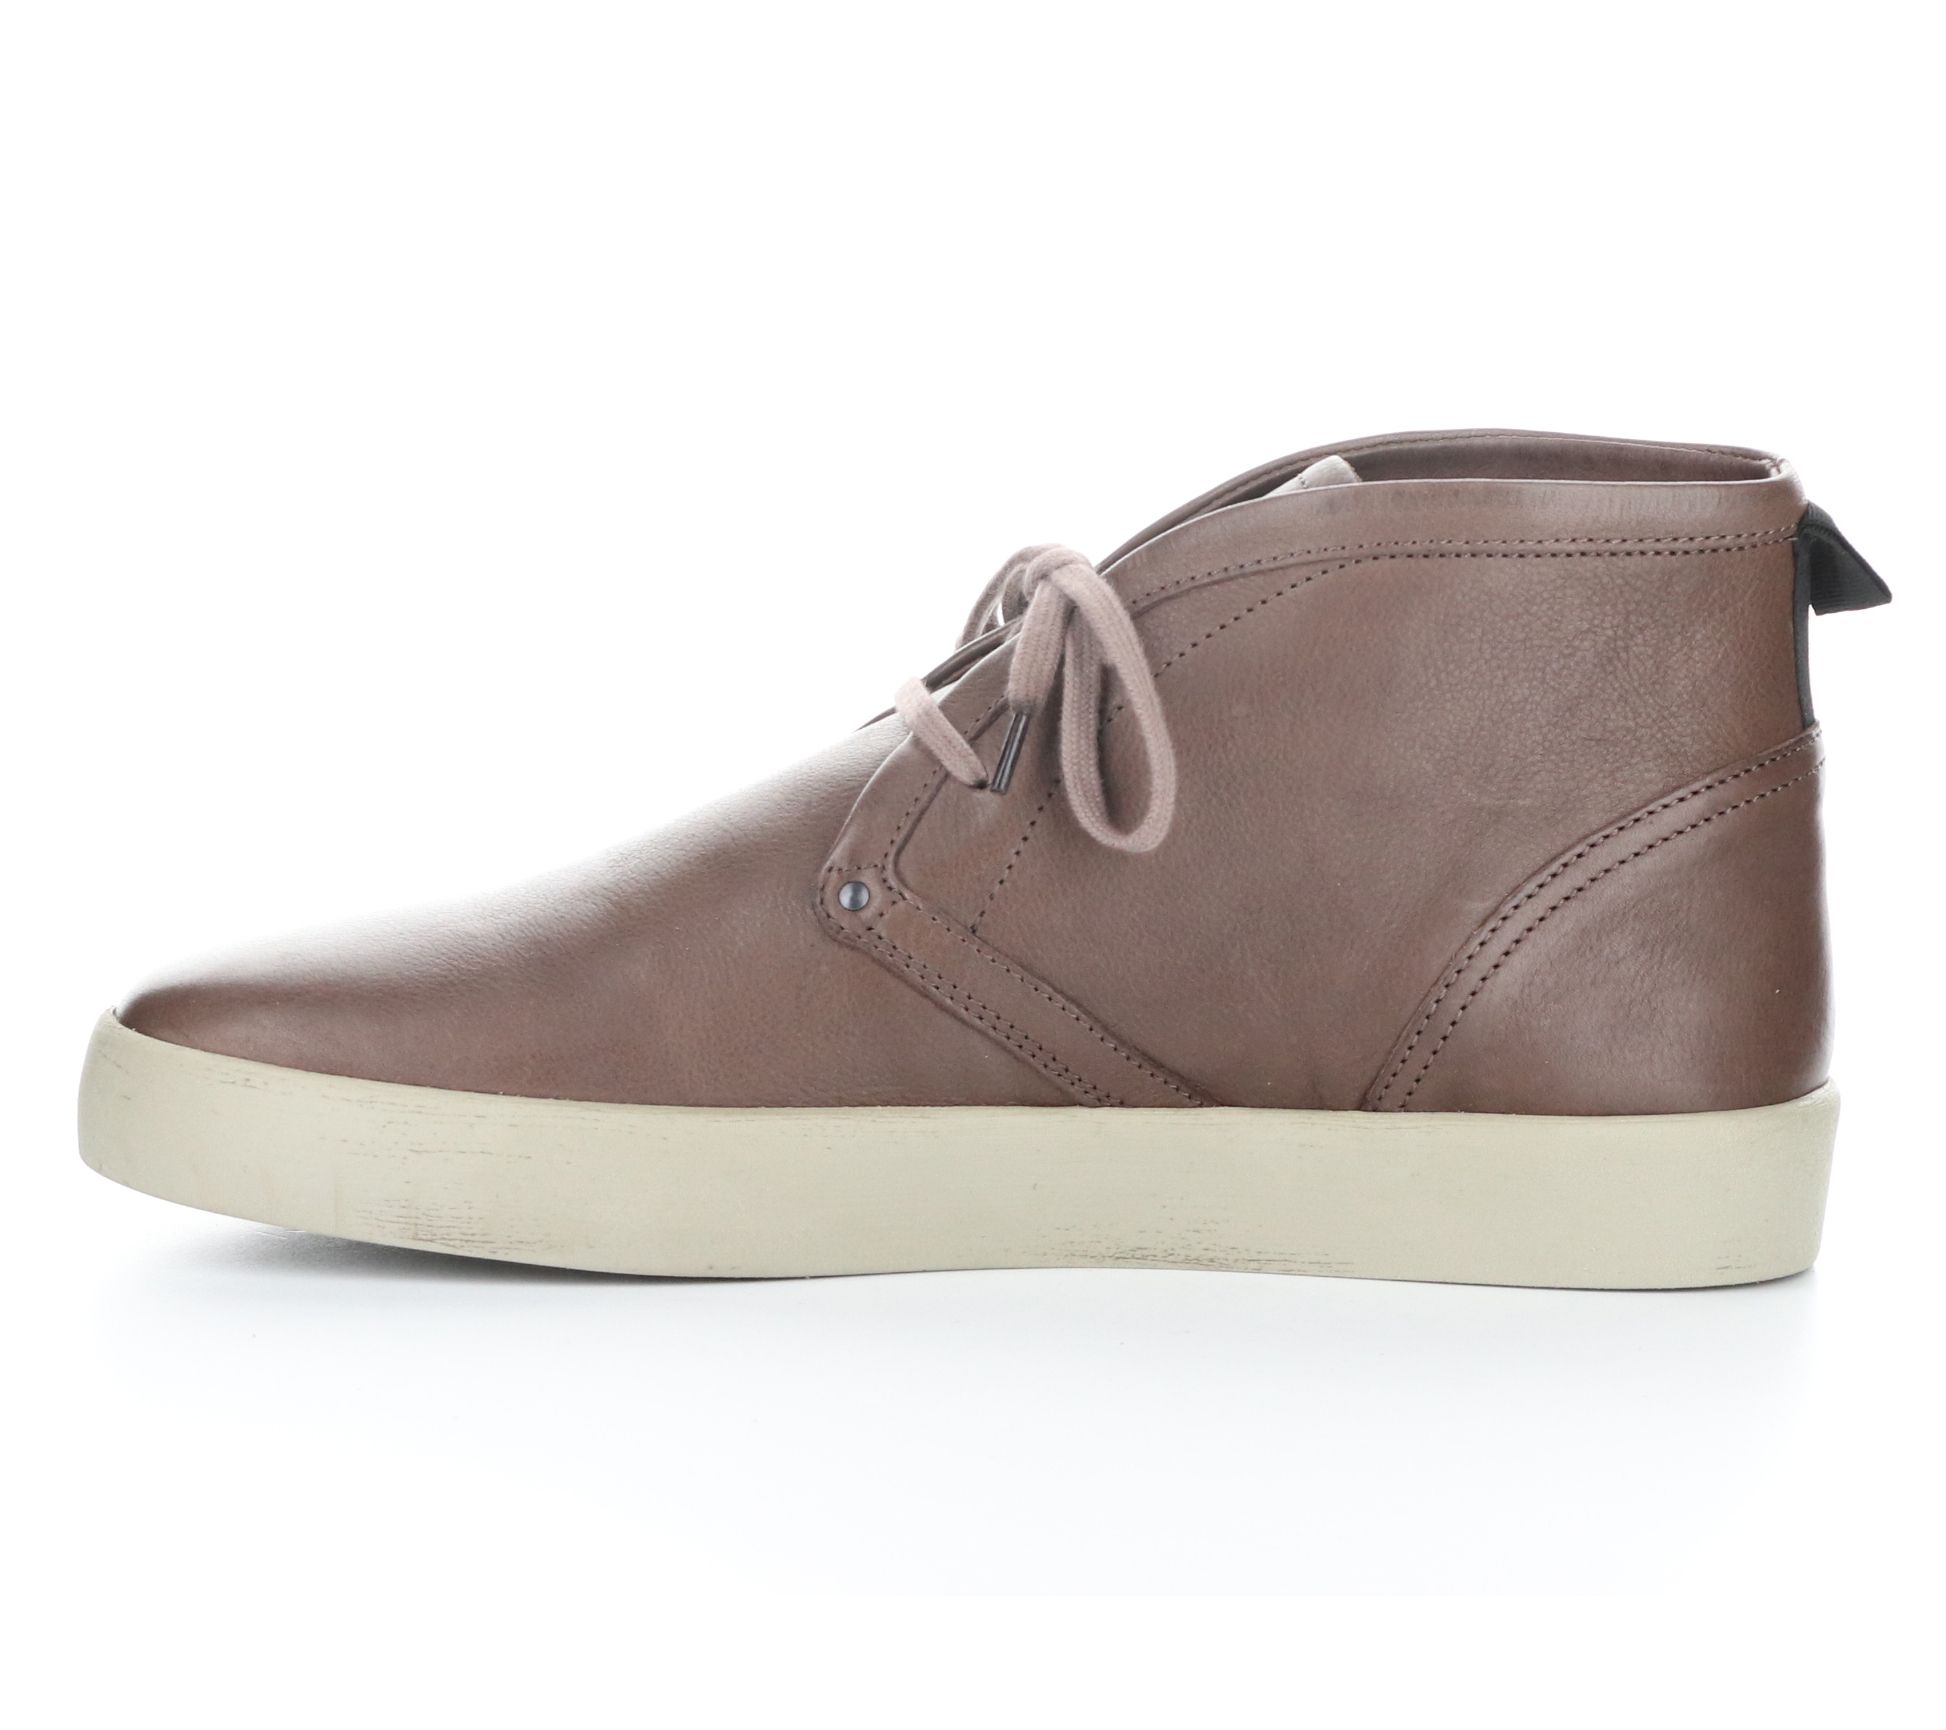 Softino's Men's Leather Fashion Sneakers- Rusk - QVC.com